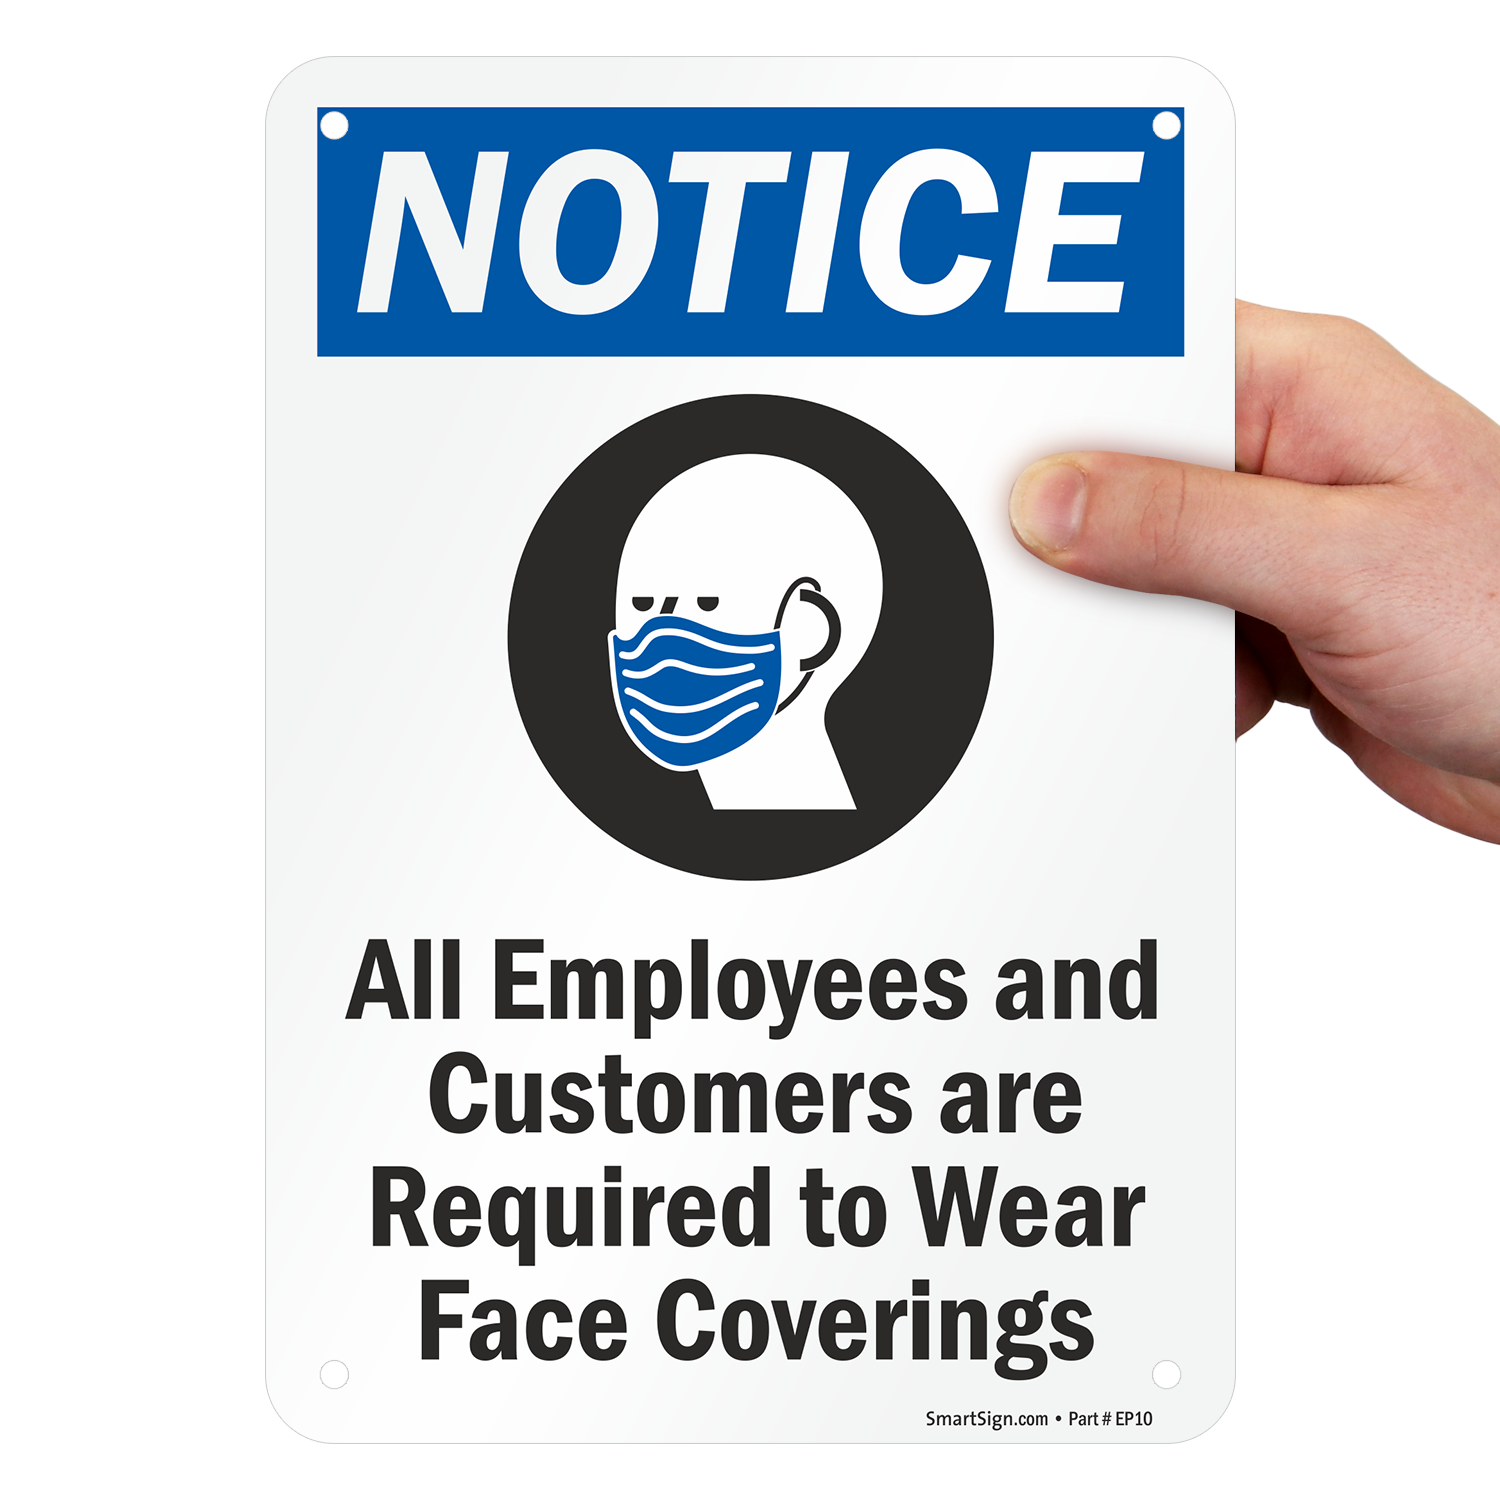 AccuformNotice WE Commit to The Well Being of Our Visitors and Employees 10 x 7 Adhesive Vinyl Please WEAR A FACE MASK Sign